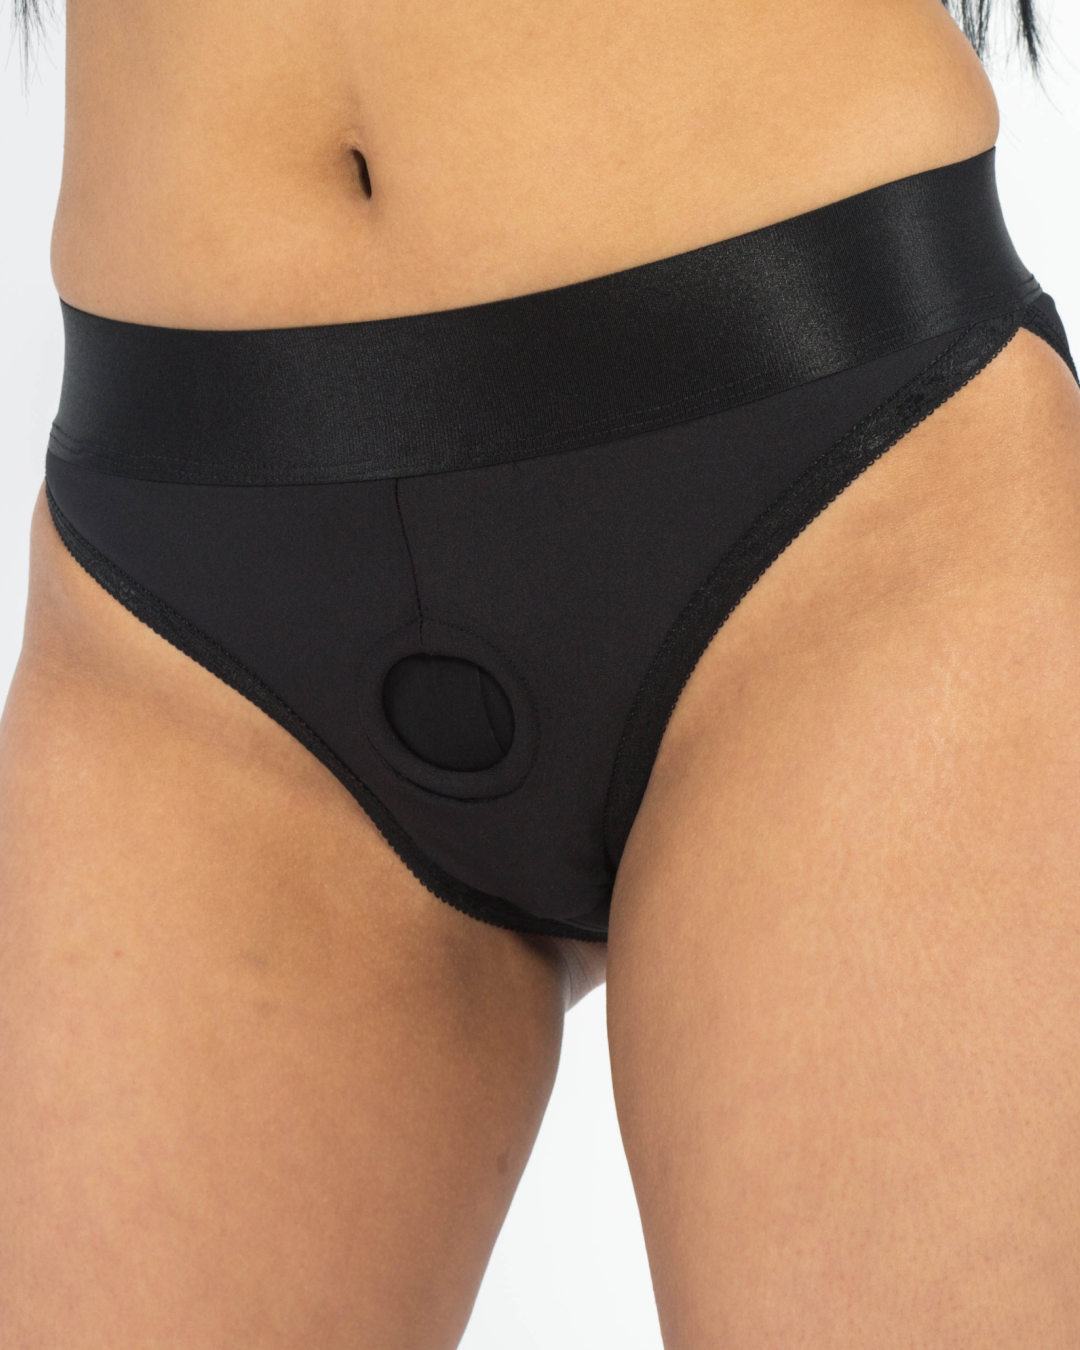 Em. Ex. Silhouette (Crotchless) Strap-On Harness Brief - Black - Small to XXXL front view on a model